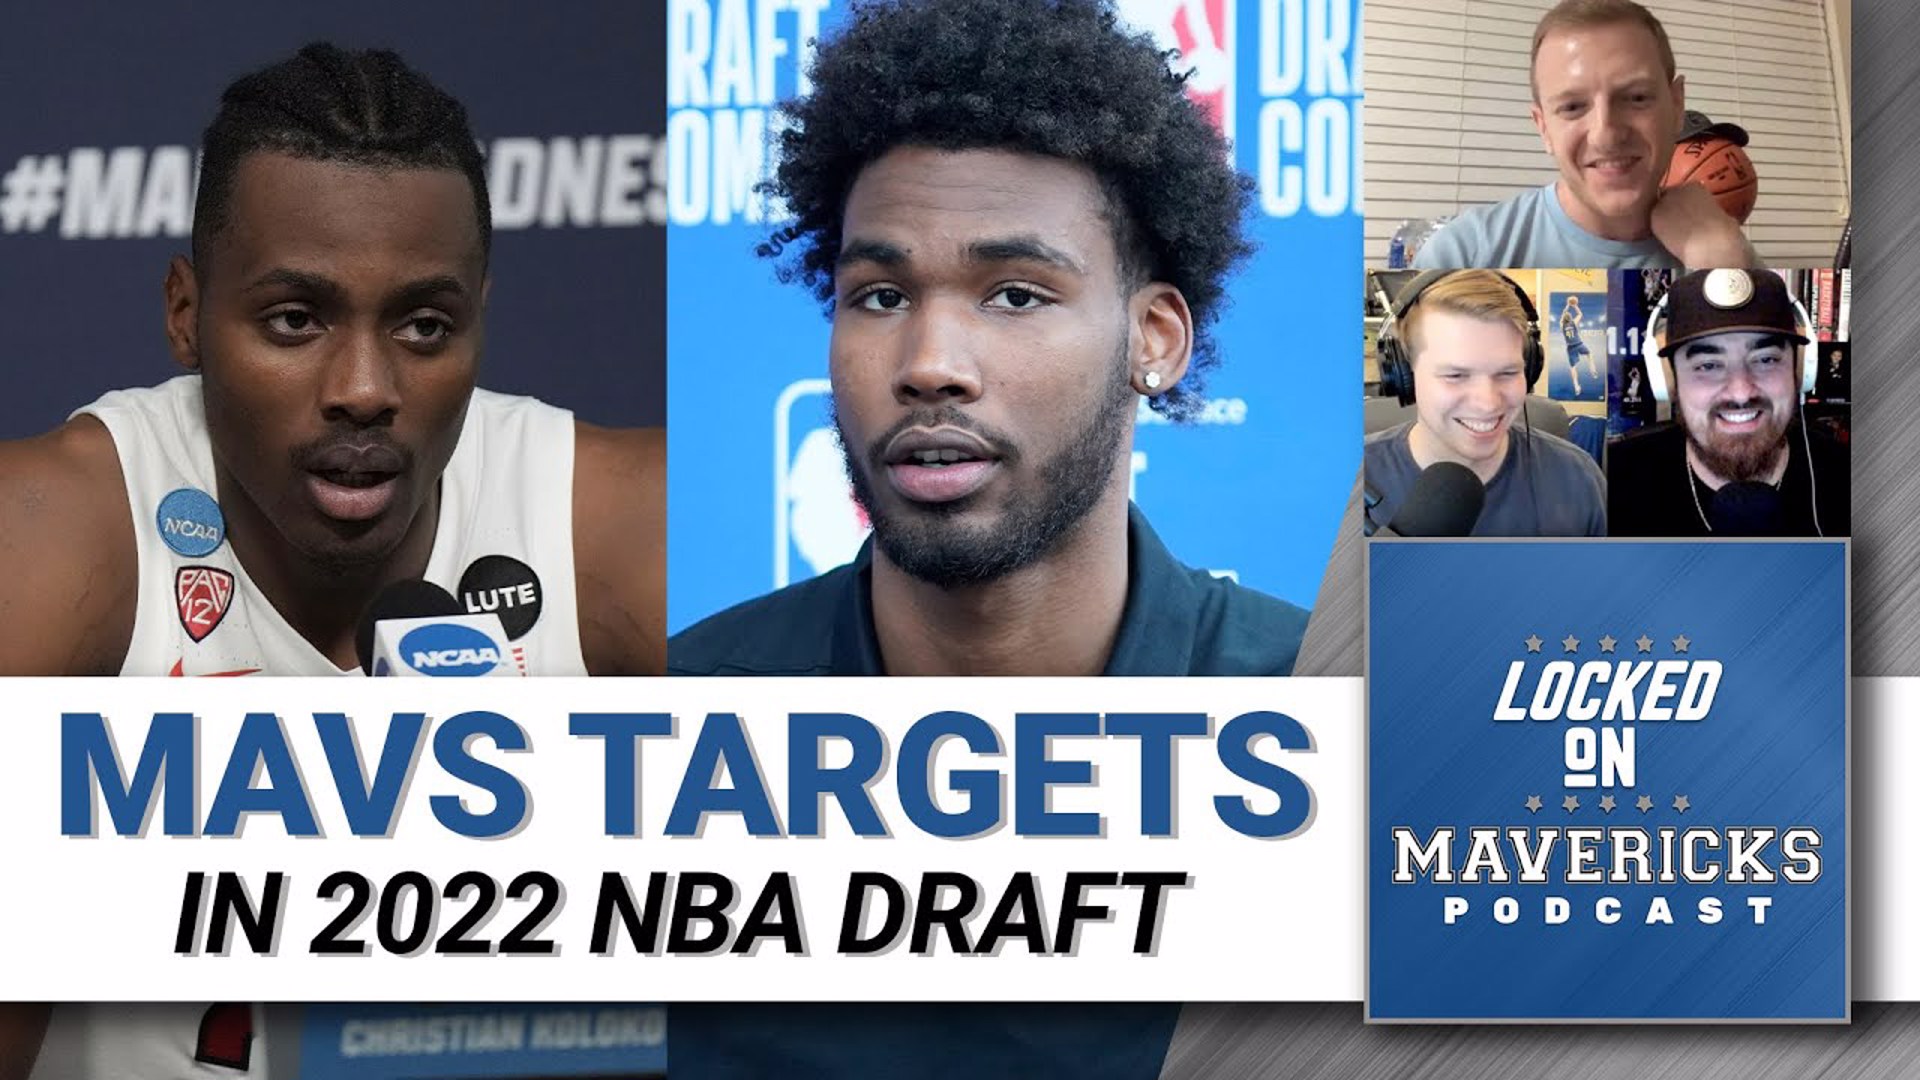 10 Draft Prospects the Dallas Mavericks Could Target in the 2022 NBA